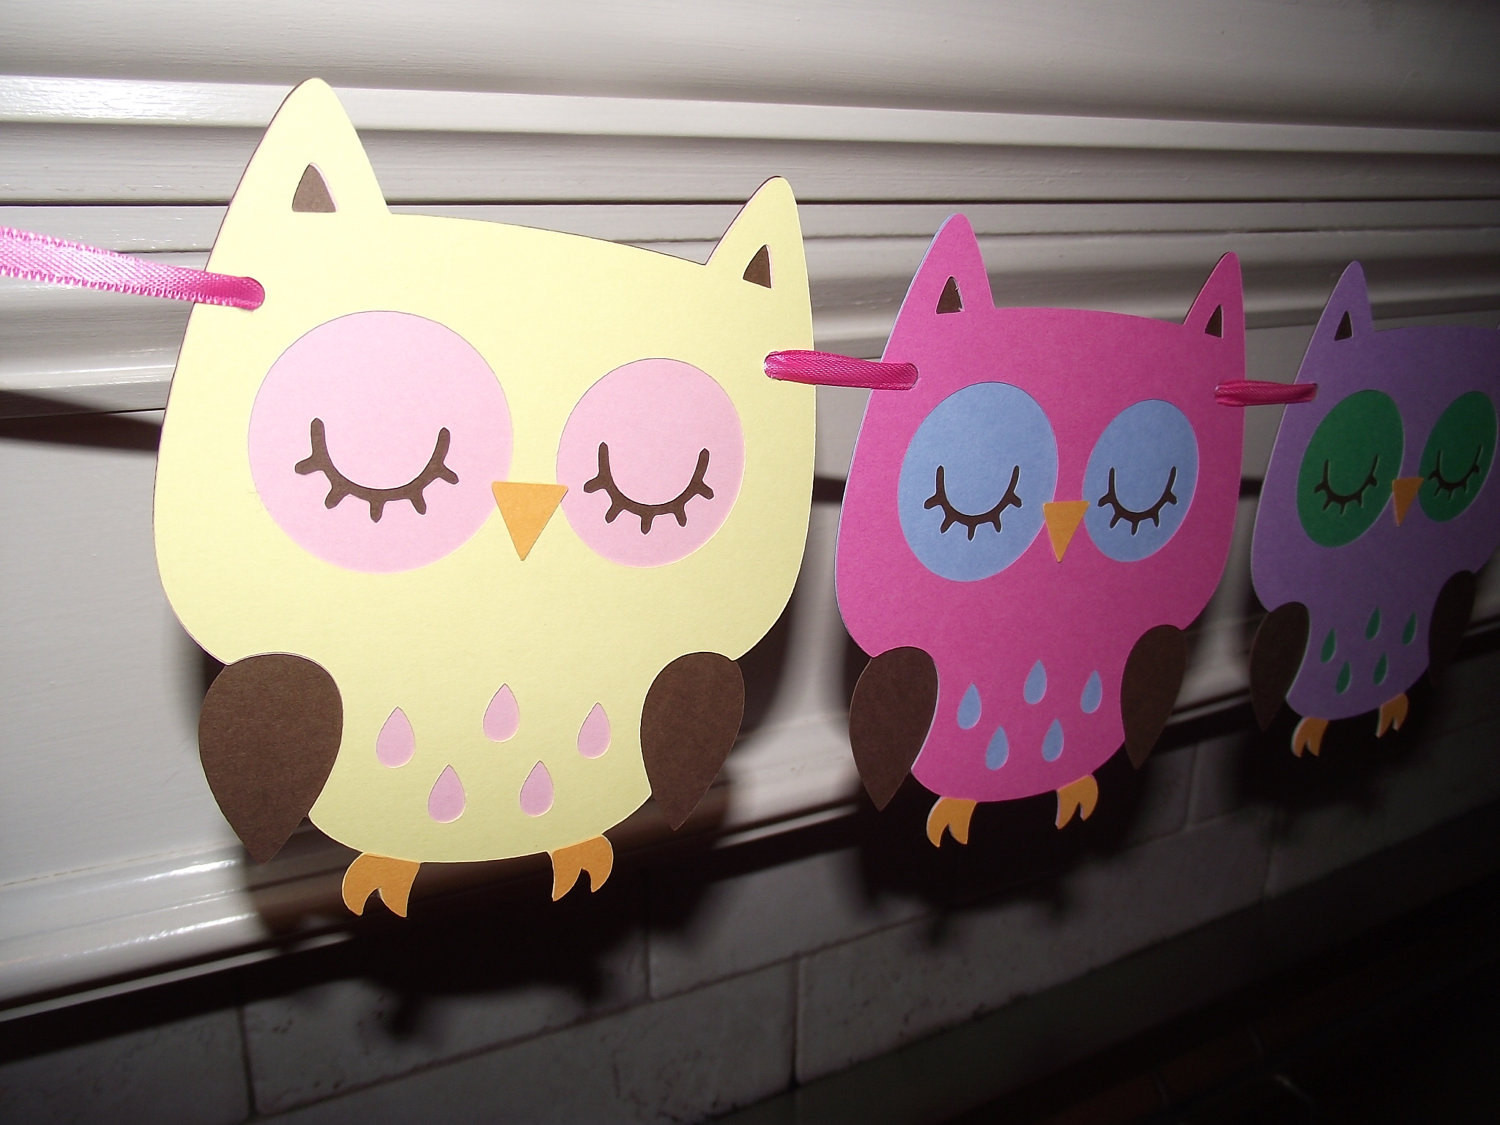 Baby Owl Decor
 Owl Decorations For Baby Shower